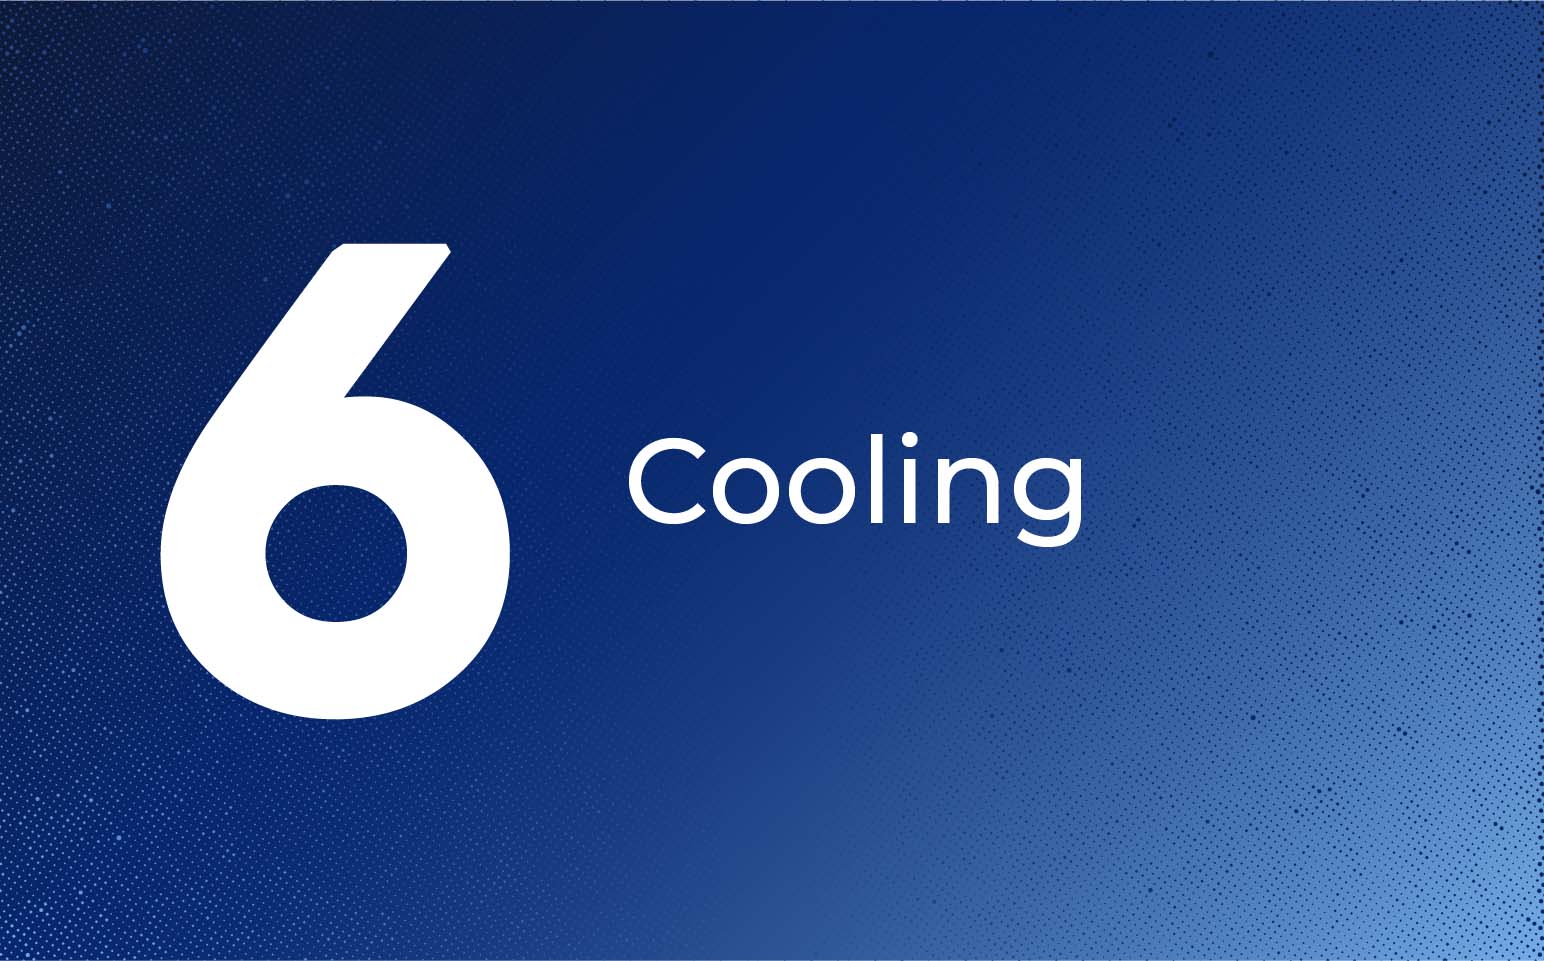 Challenge 6 – Cooling